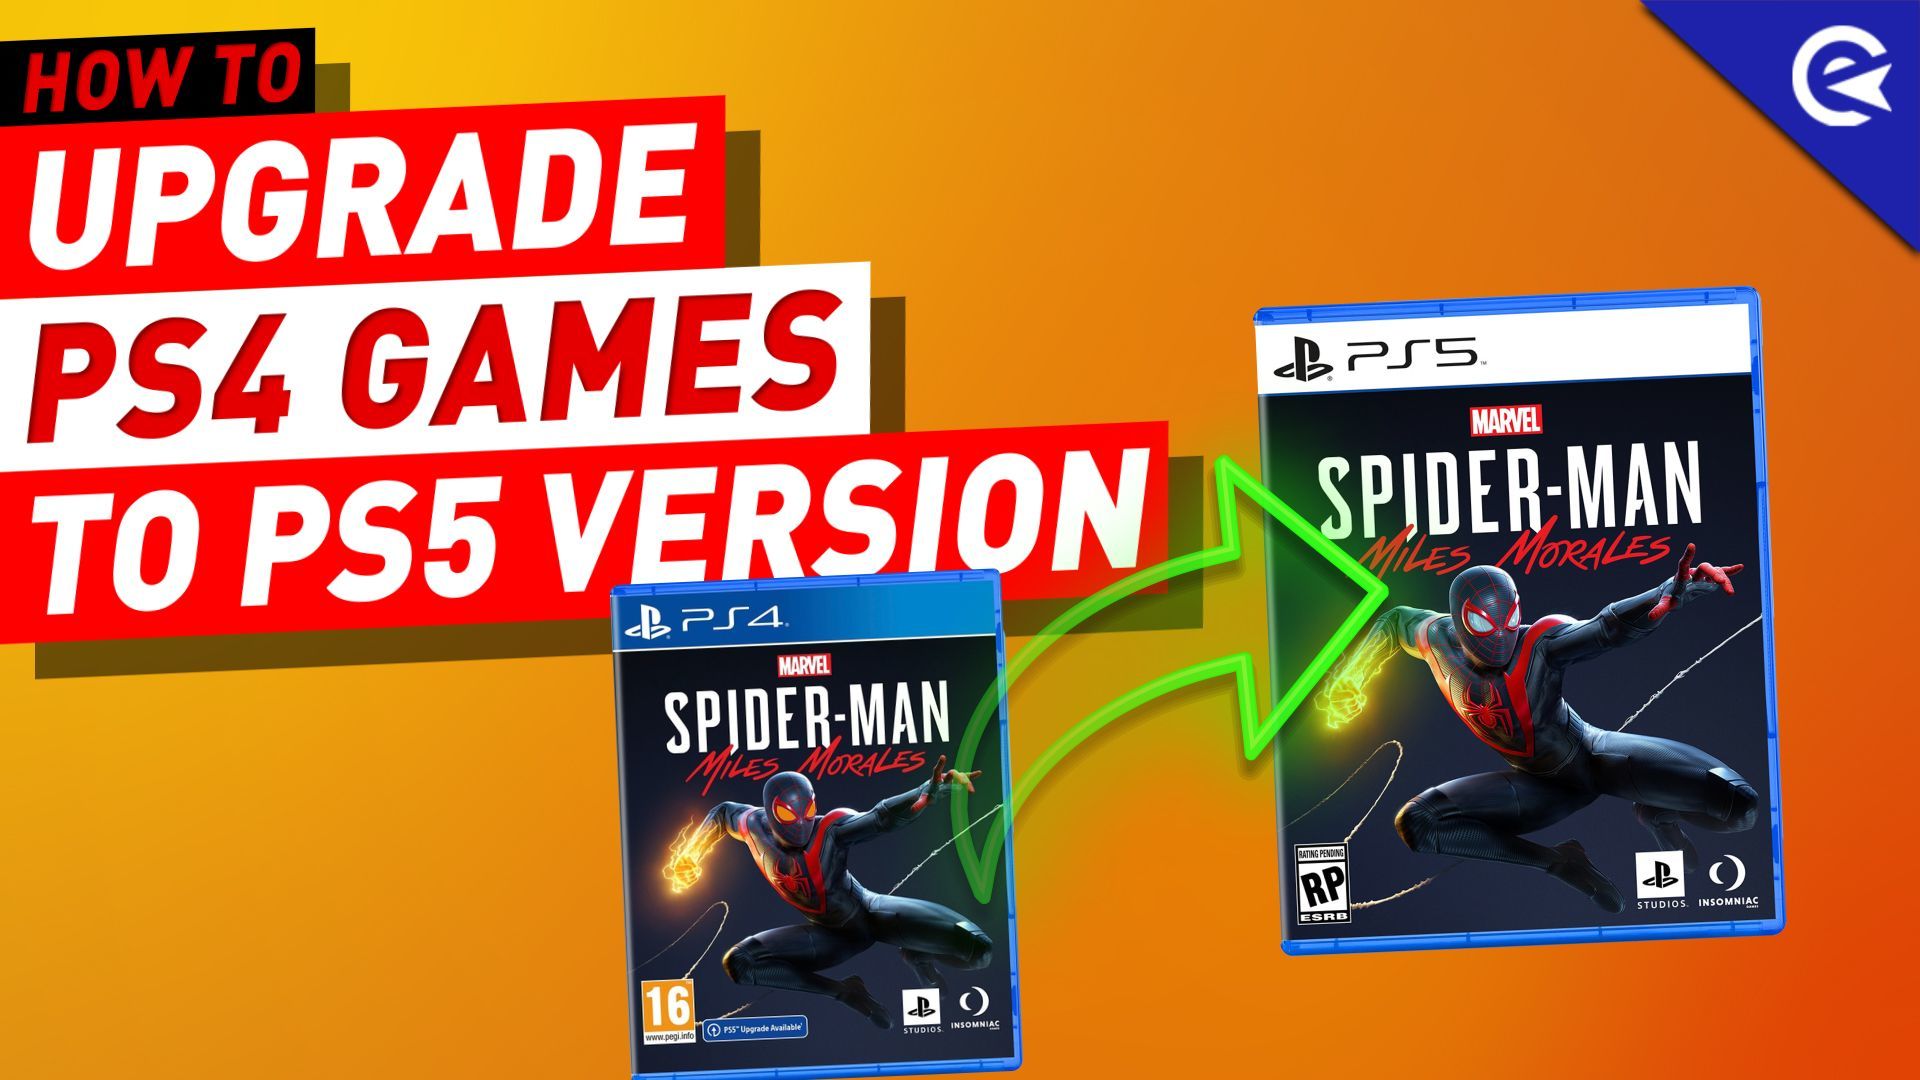 How to Upgrade PS4 Games to PS5